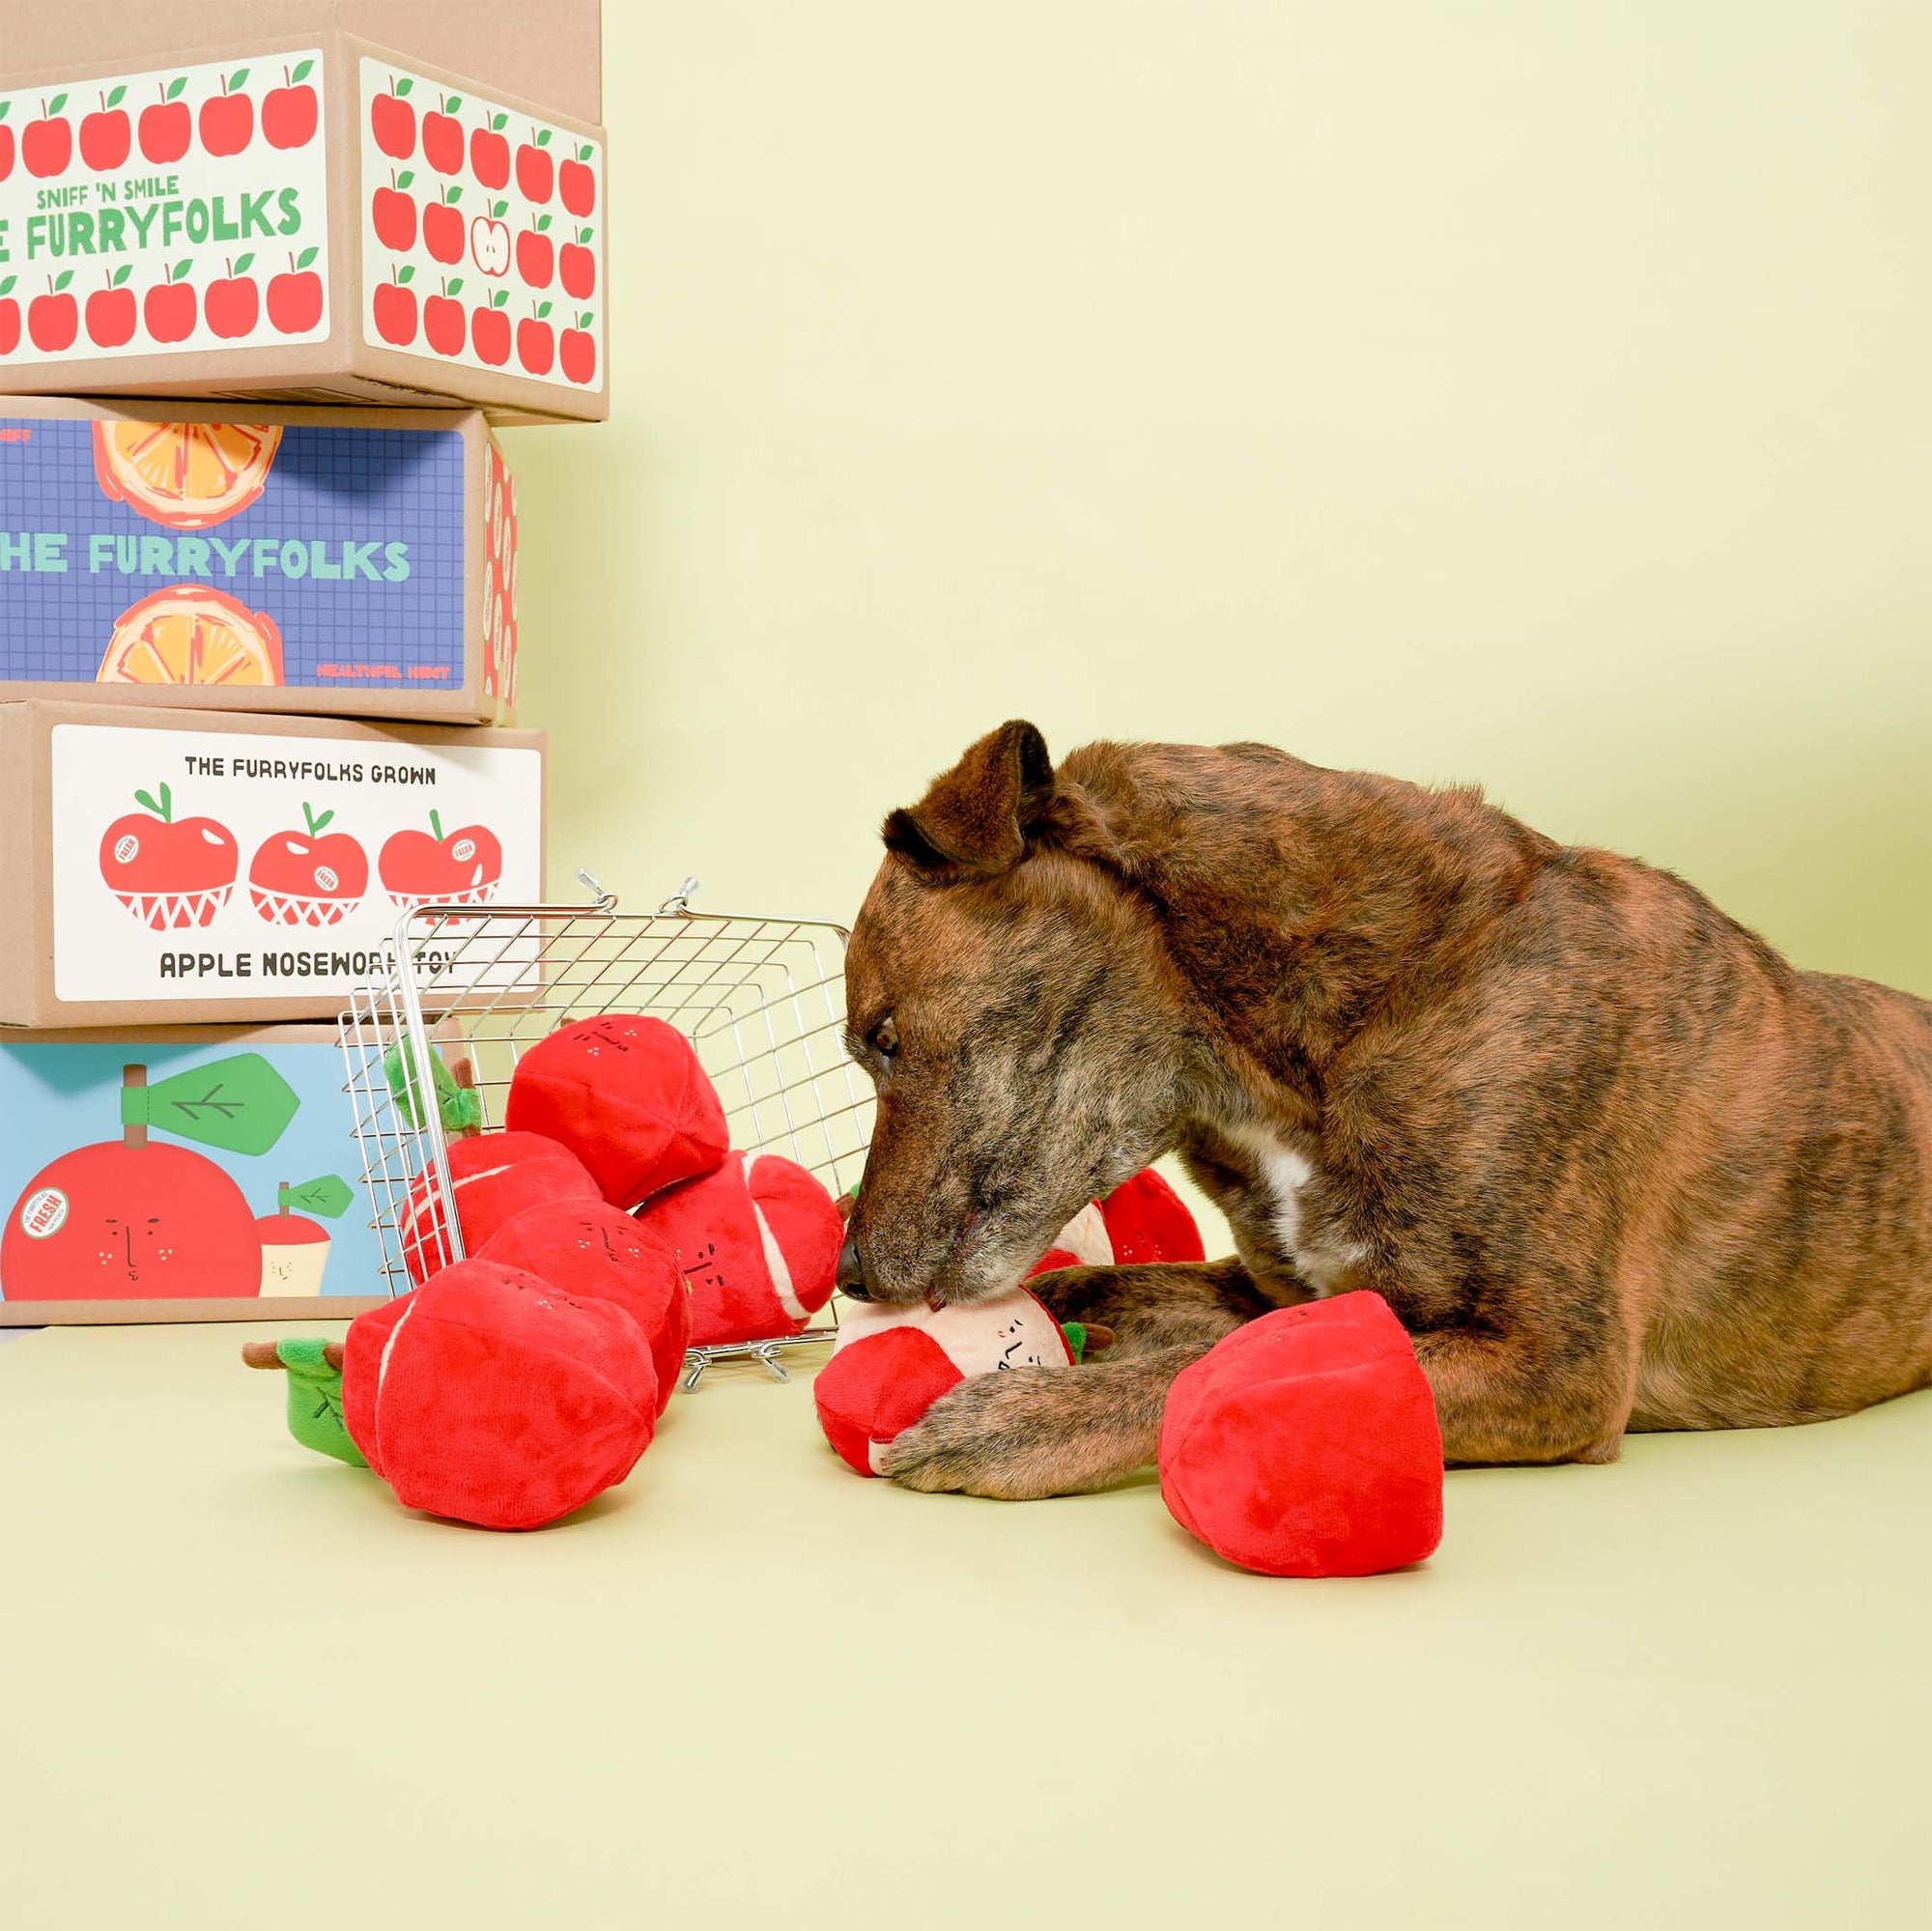 A brown dog examining red apple-shaped dog toys spilled from a tipped-over shopping cart, with boxes labeled "The Furryfolks Apple Nosework Toy" in the background.